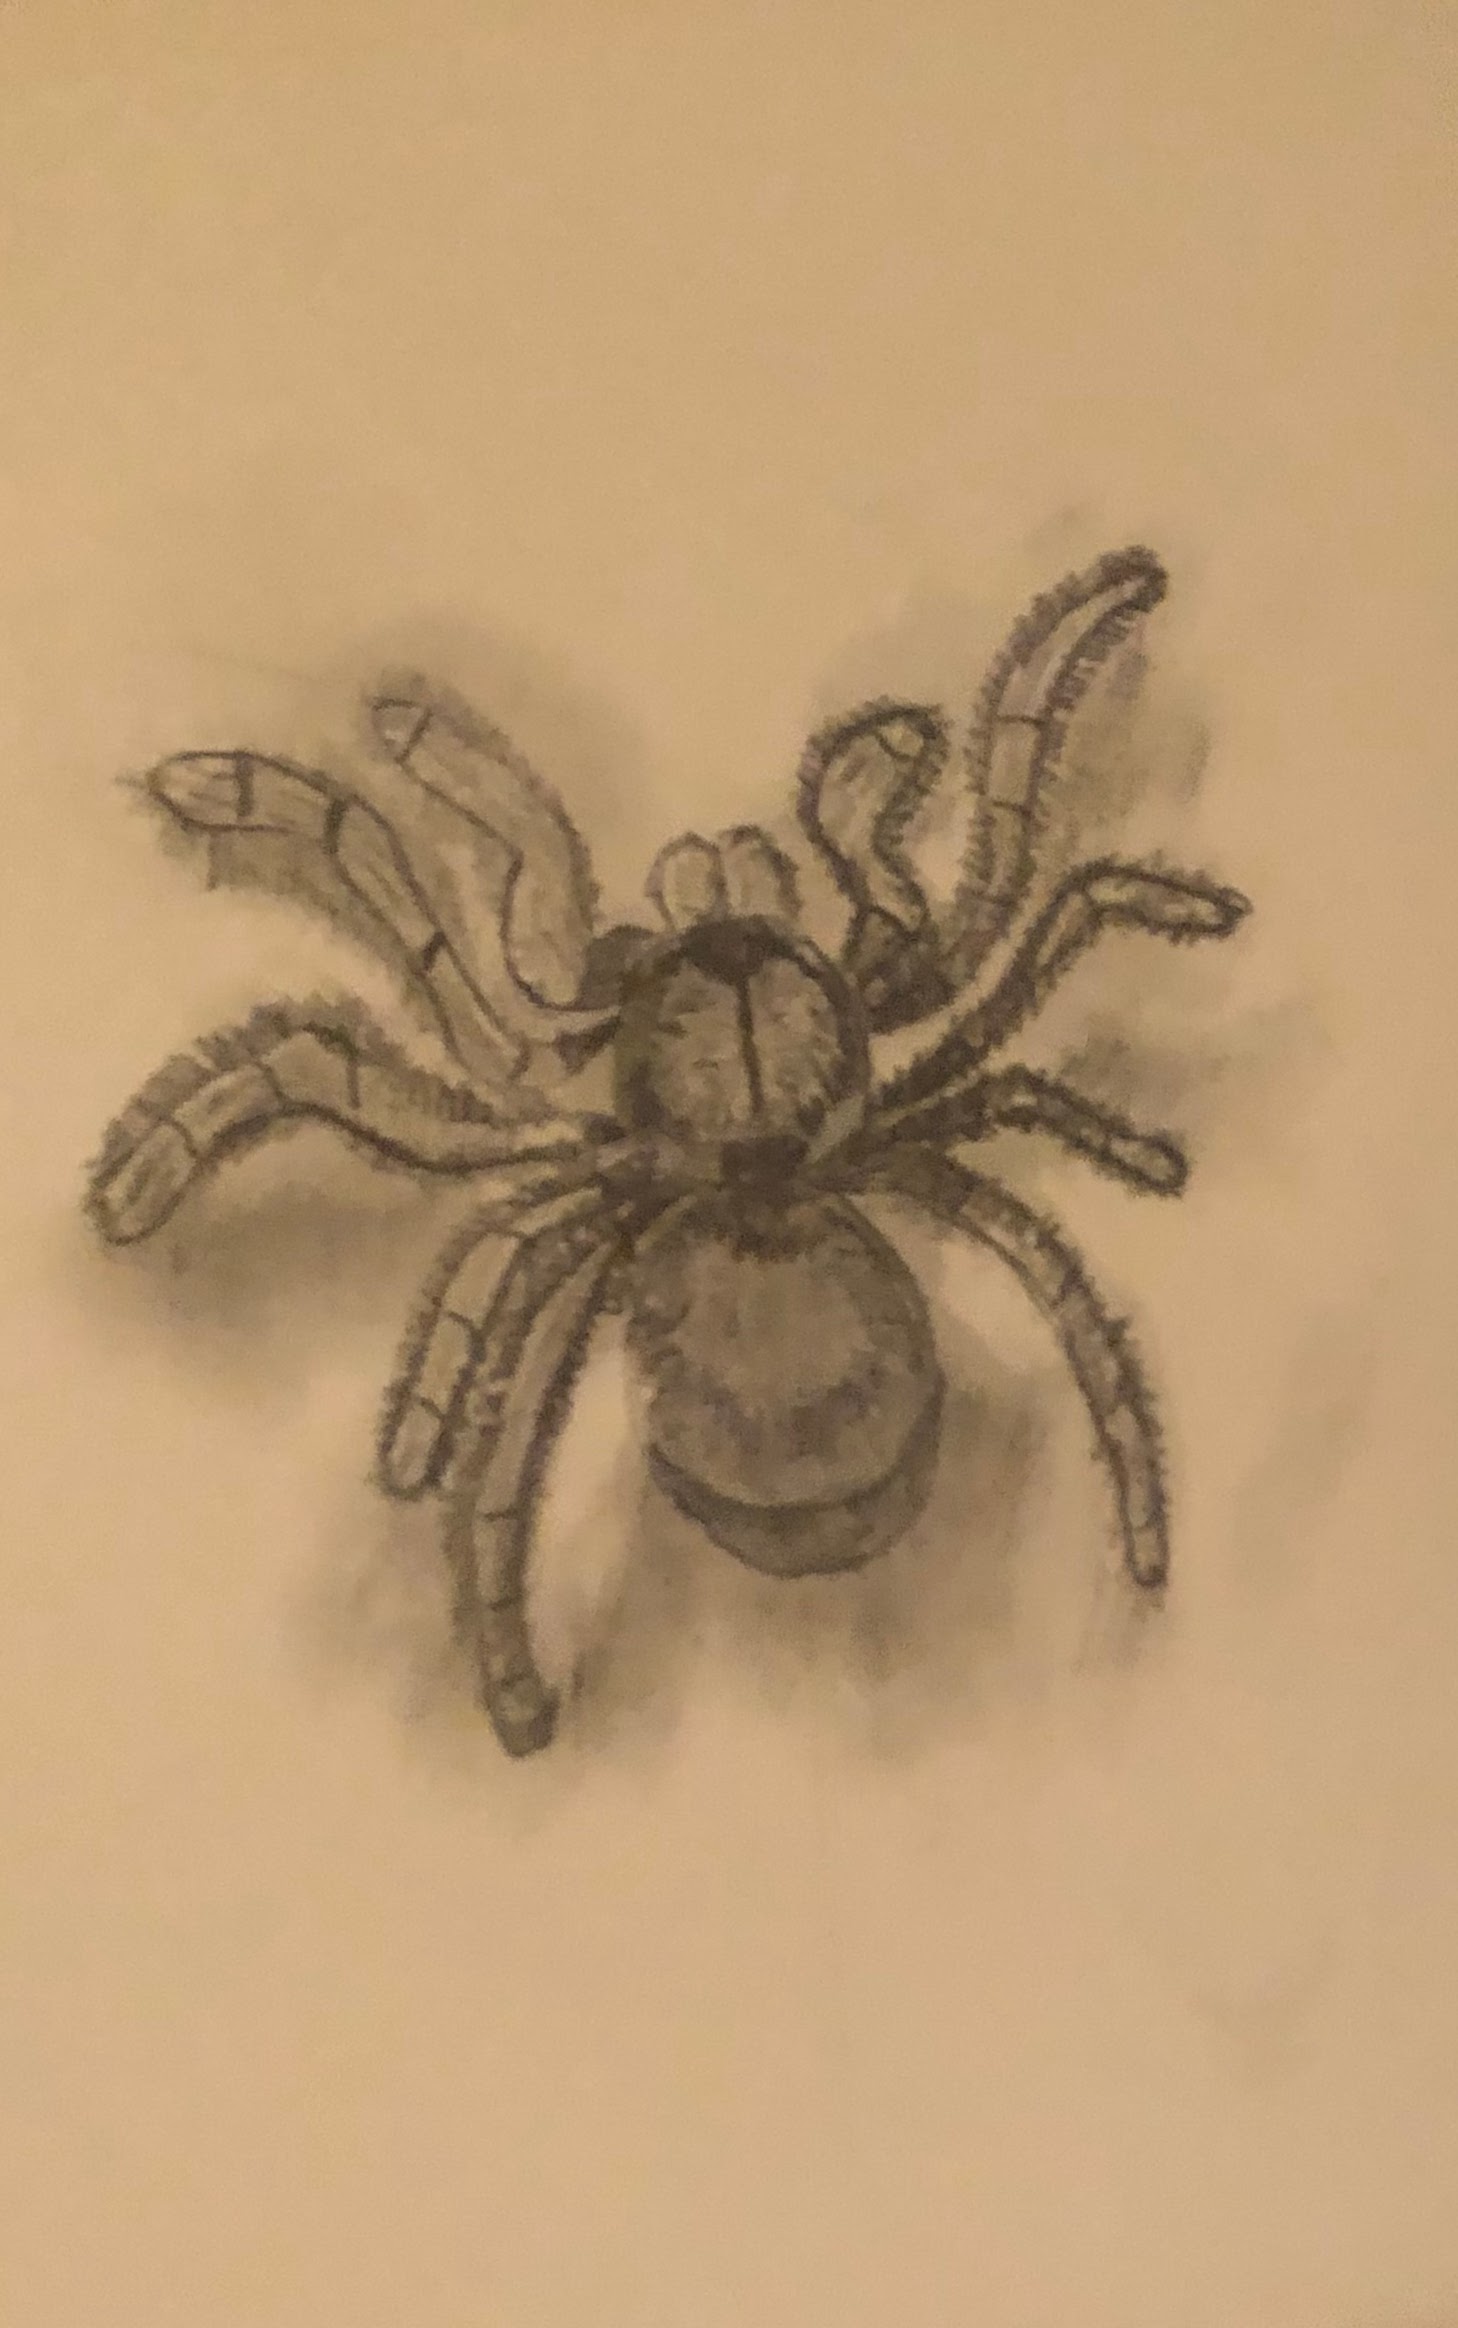 hyperdetailed and realistic drawing of a giant tarantula